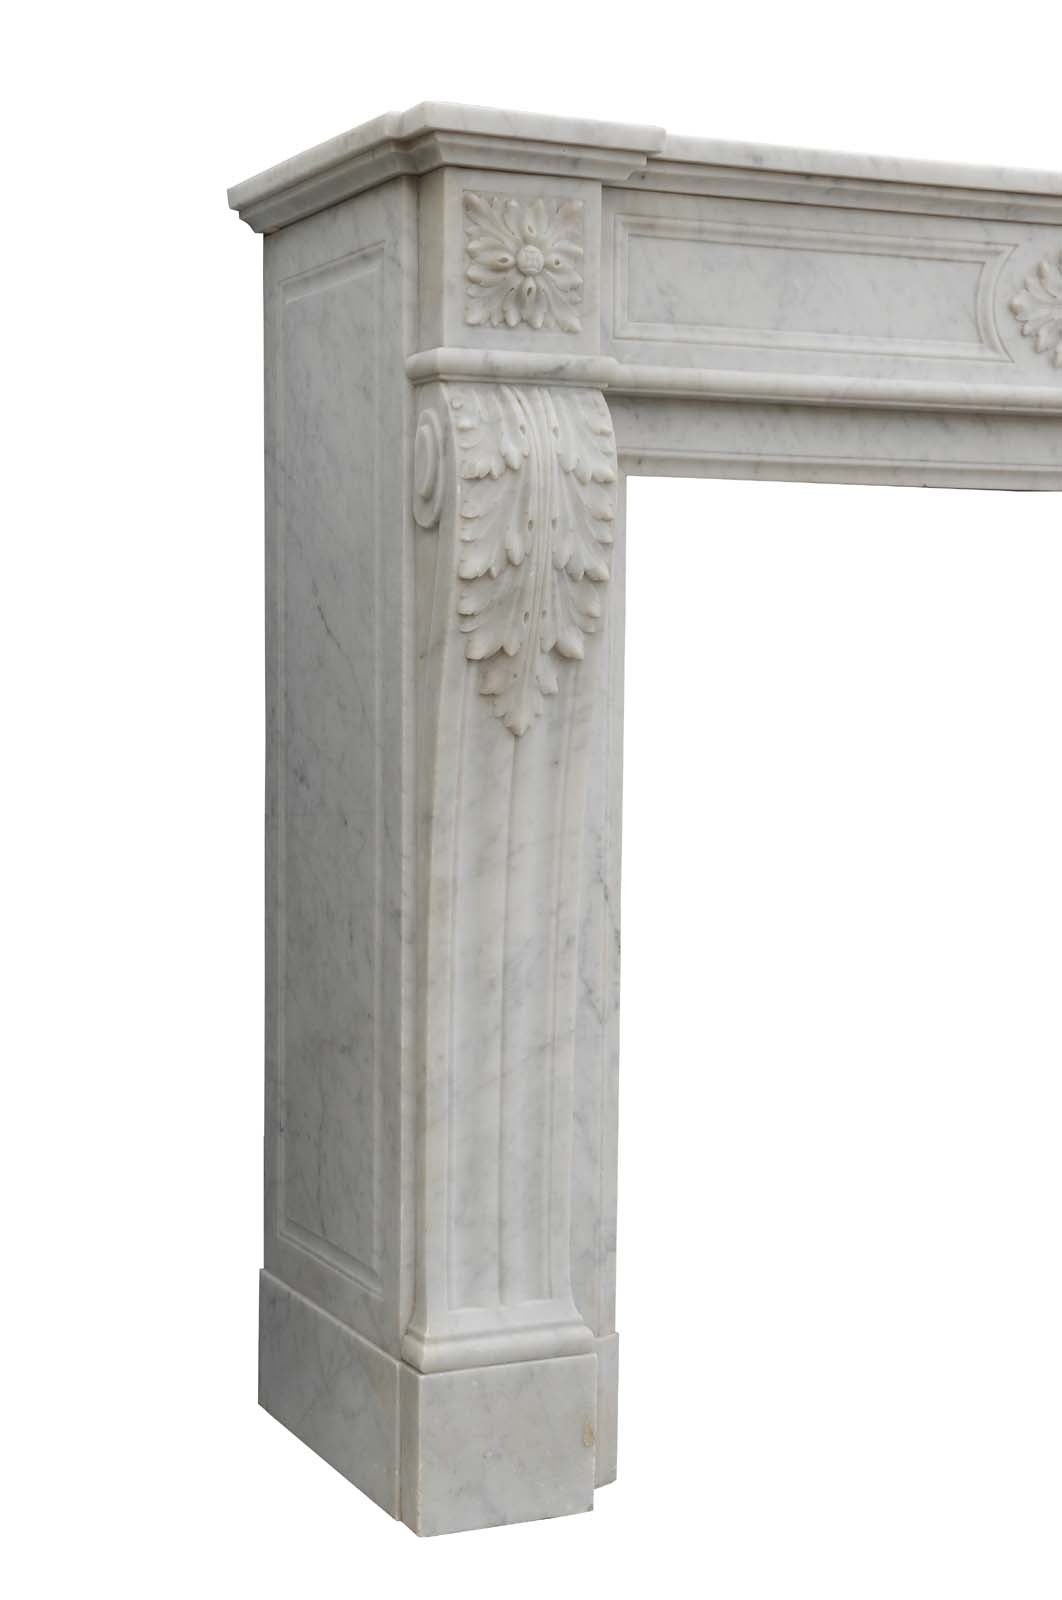 French Louis XVI style white marble fireplace dated 19th century. Measures: Opening 32 x 35 in.